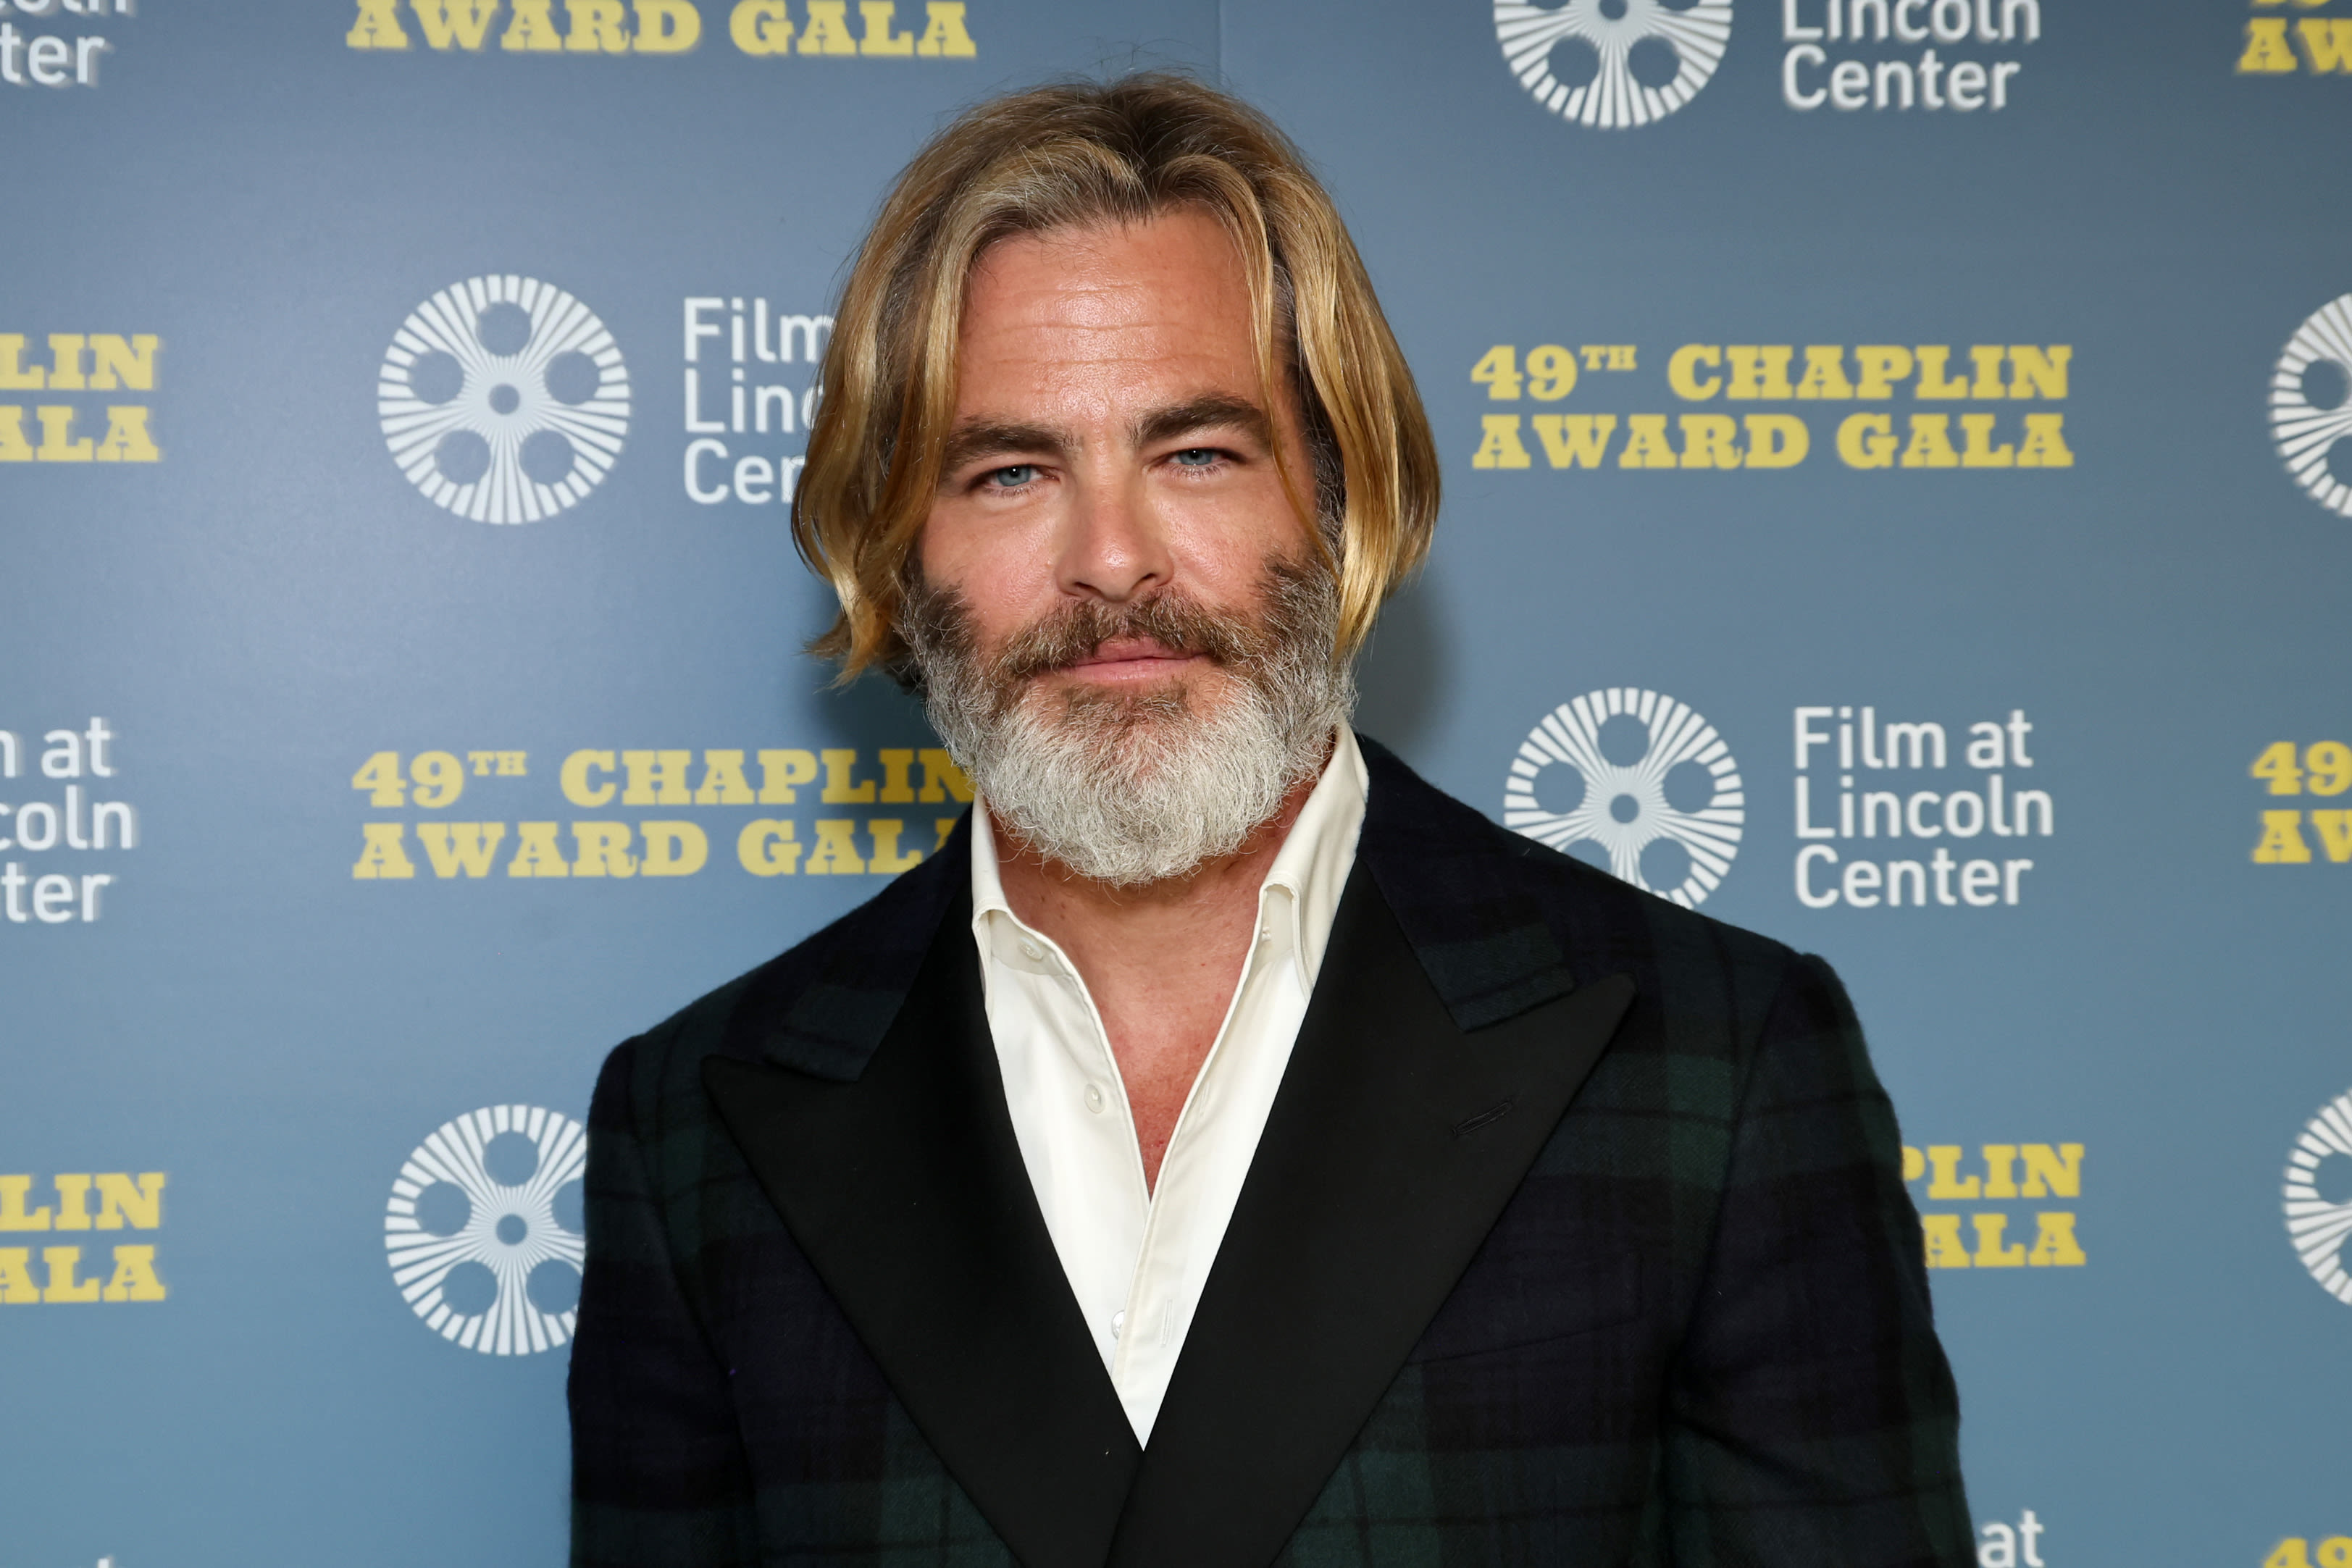 Chris Pine’s ‘Poolman’ Got ‘F—ing Panned’ So Much That He Thought ‘Maybe I Did Make a Pile of S—‘; But He Refuses to...